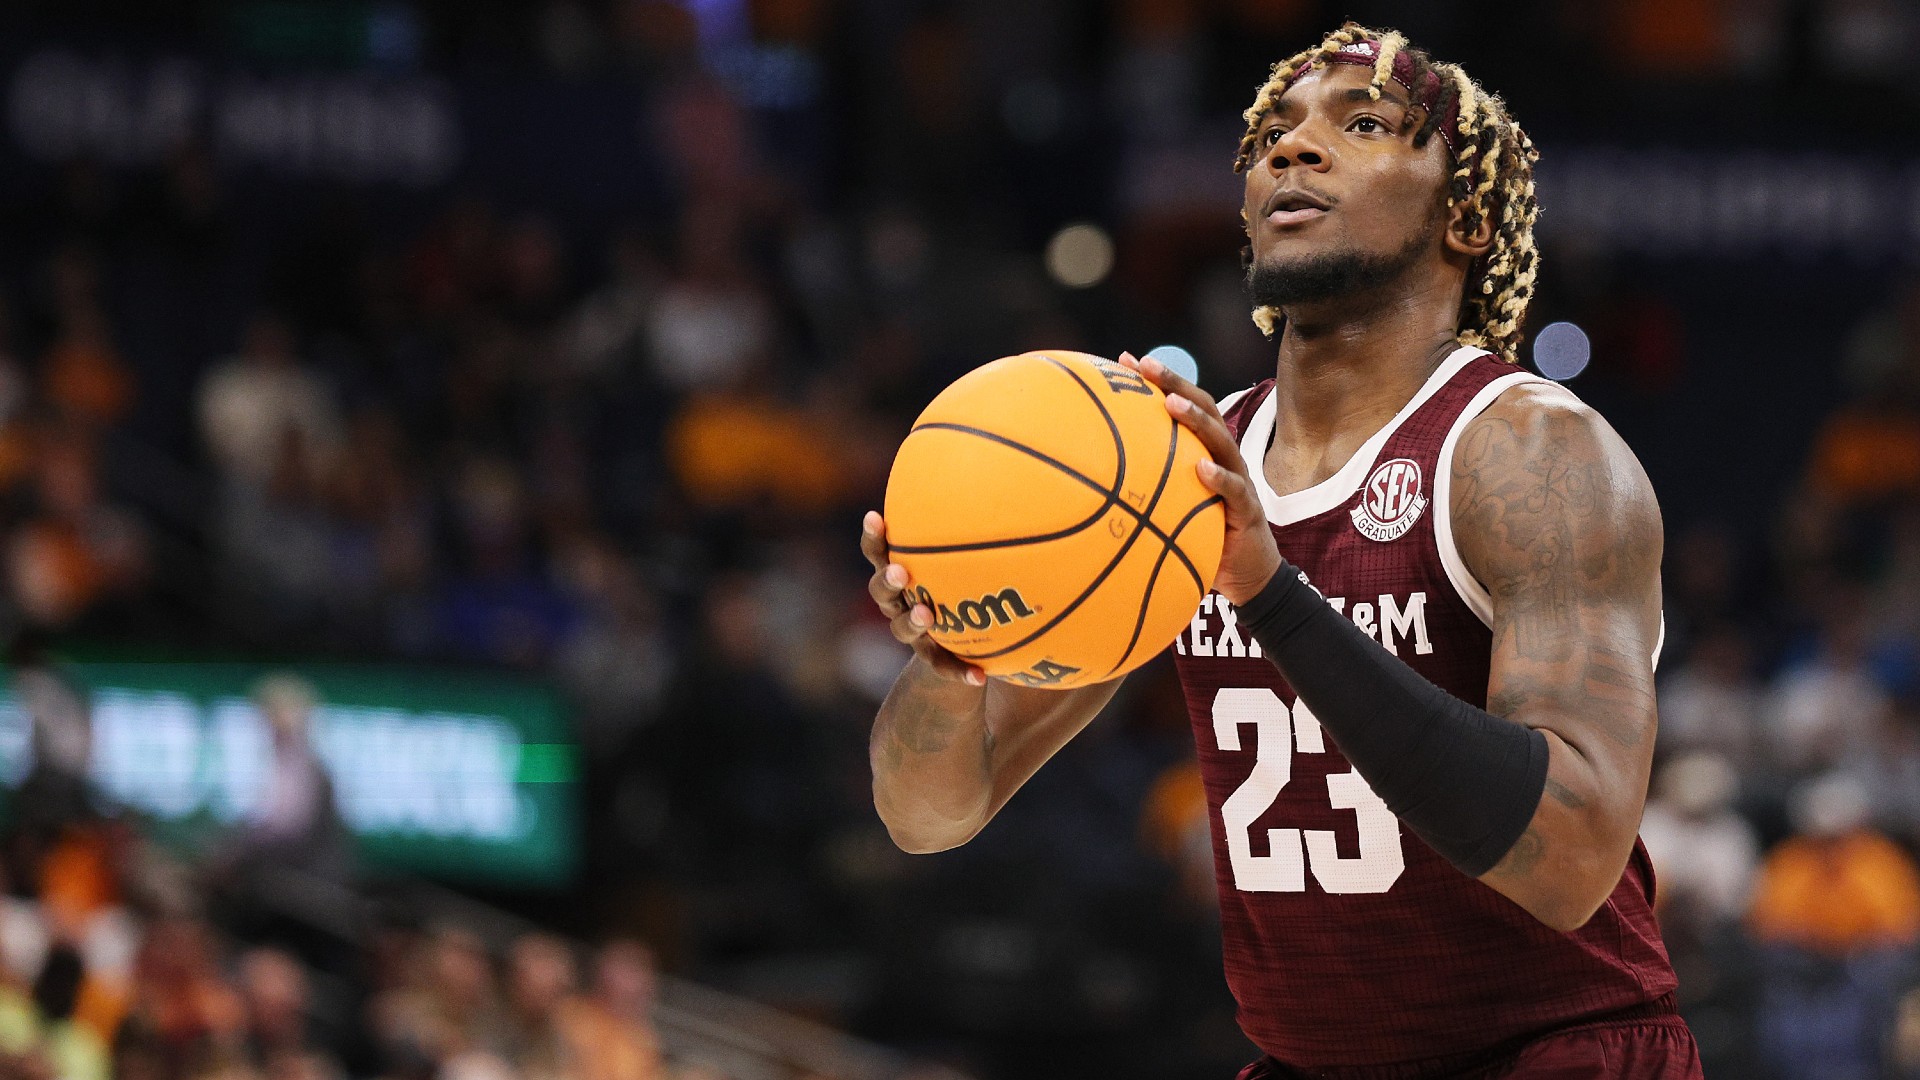 Xavier vs. Texas A&M Odds & Picks: Betting Preview for Thursday’s NIT Final article feature image